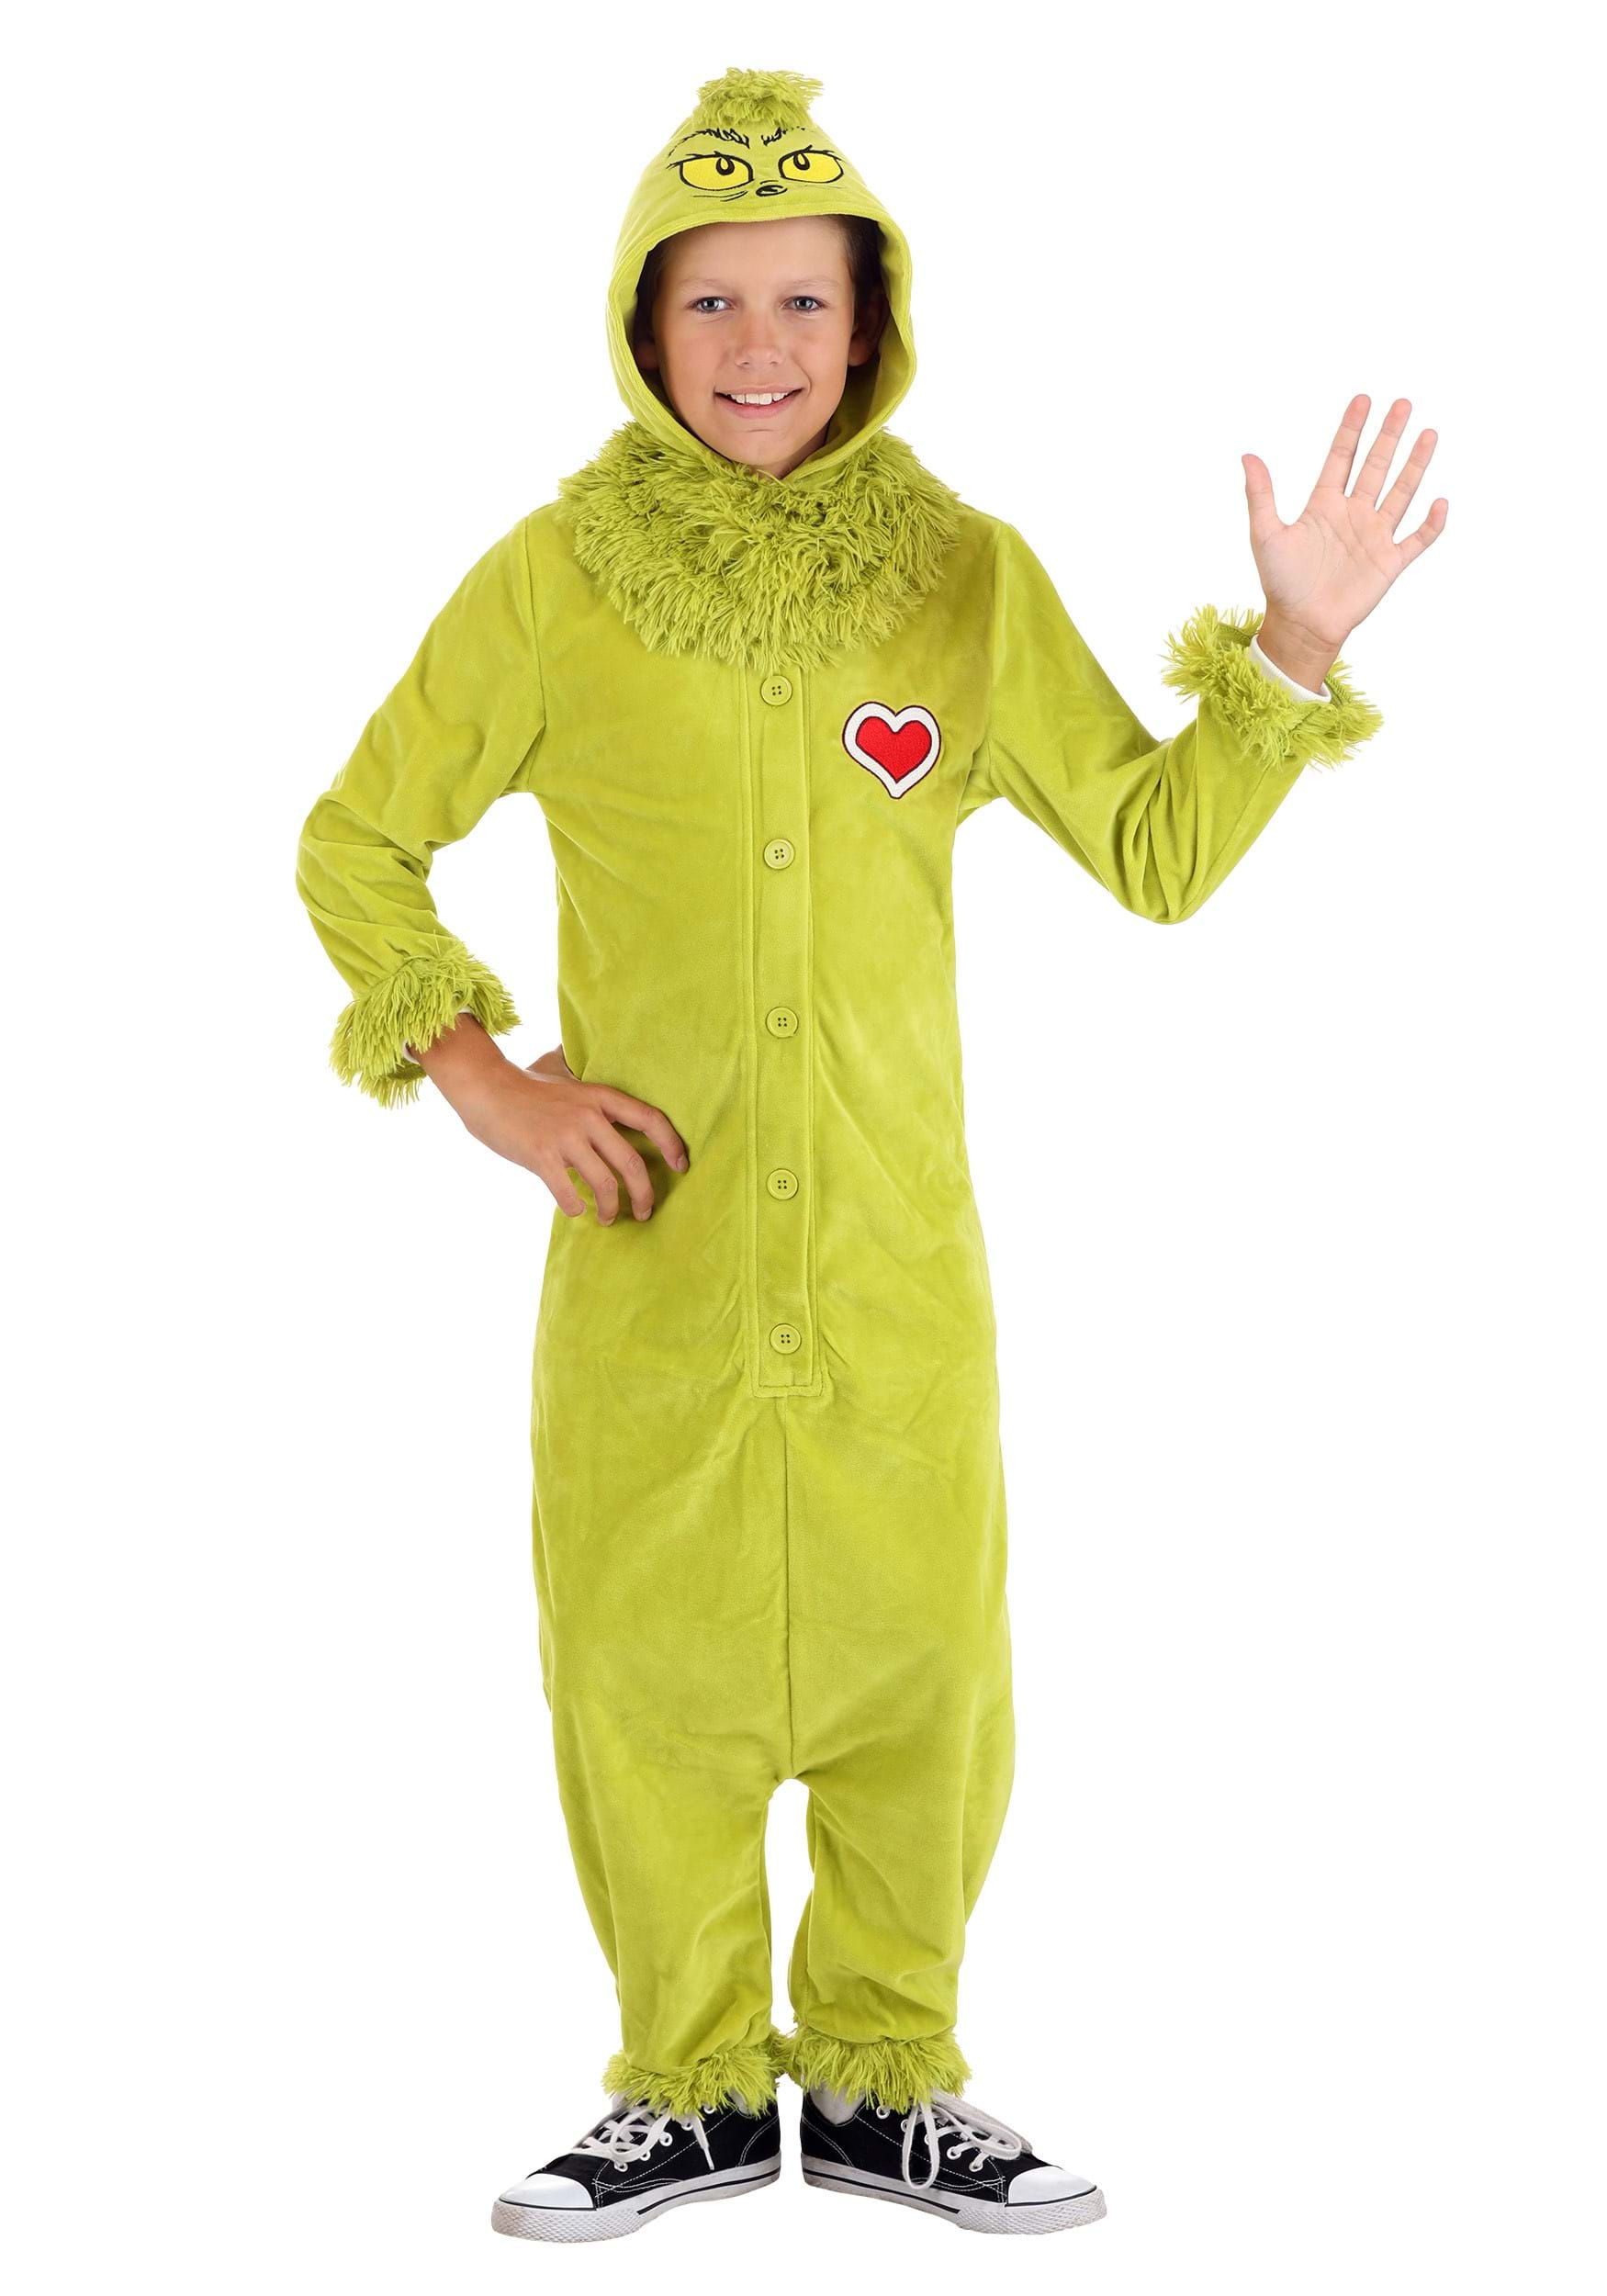 Photos - Fancy Dress FUN Costumes Kid's The Grinch Jumpsuit Costume | Dr. Seuss Costumes Green&